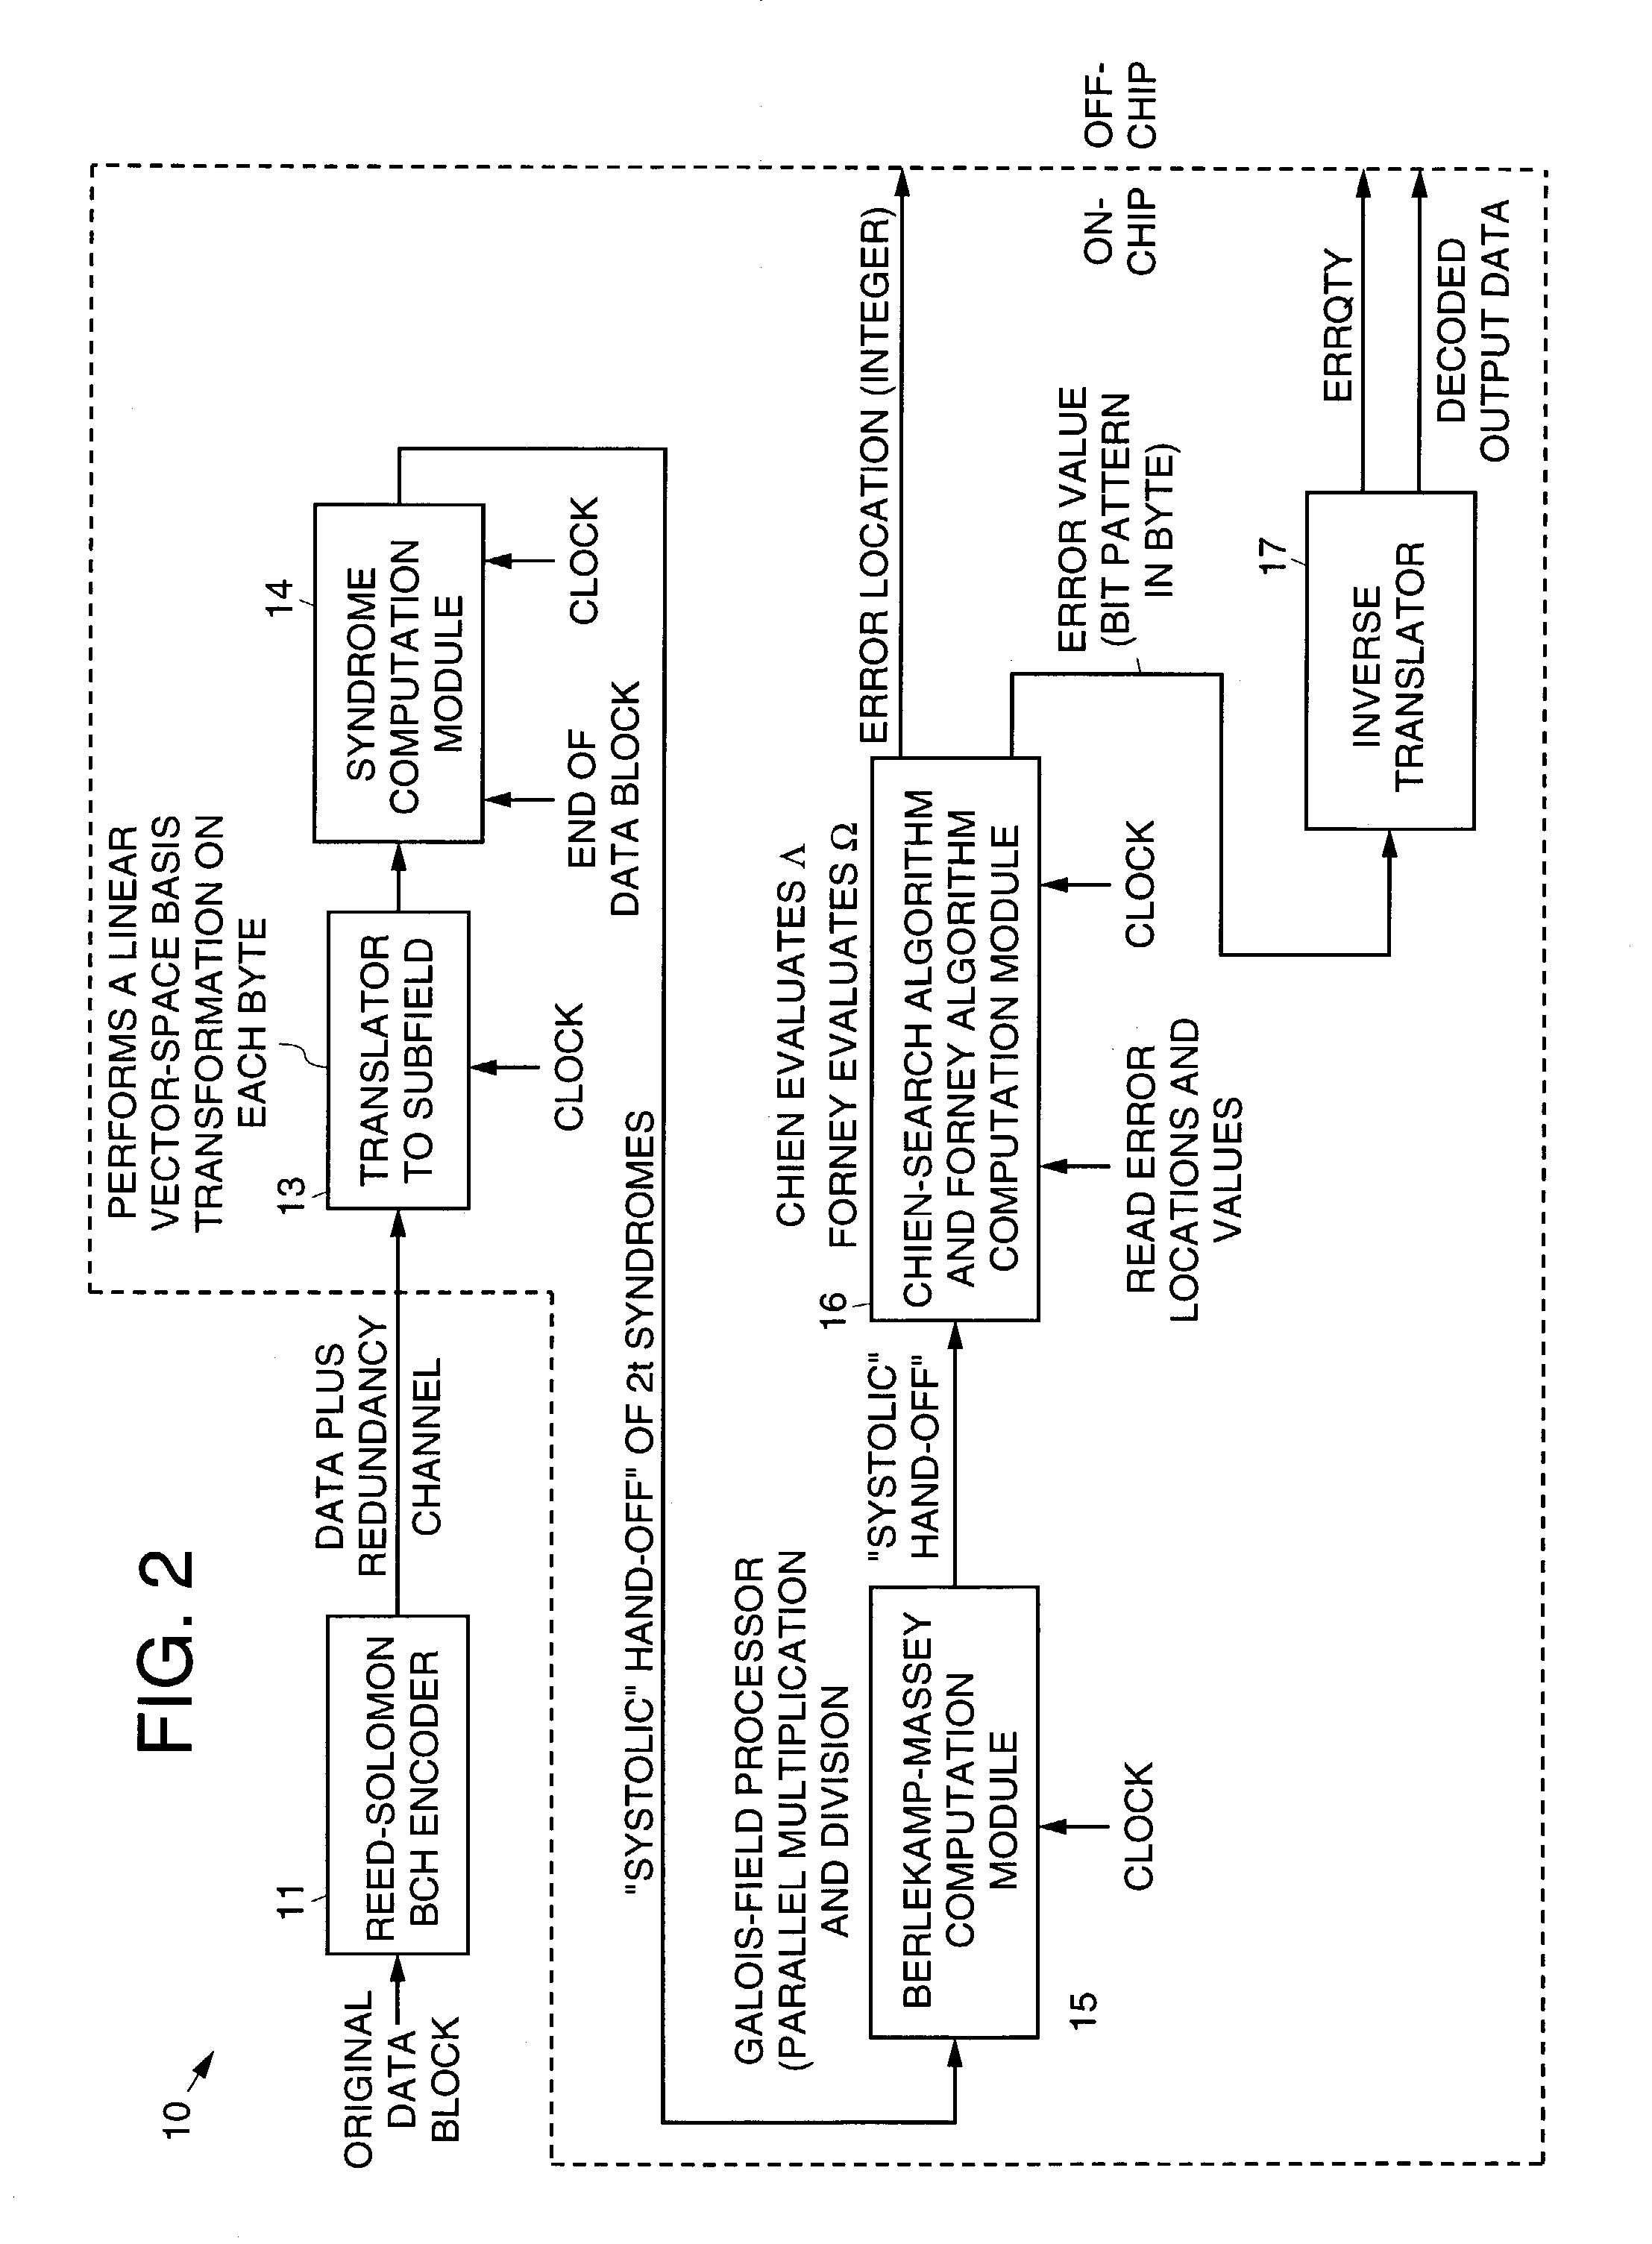 Modular Galois-field subfield-power integrated inverter-multiplier circuit for Galois-field division over GF(256)